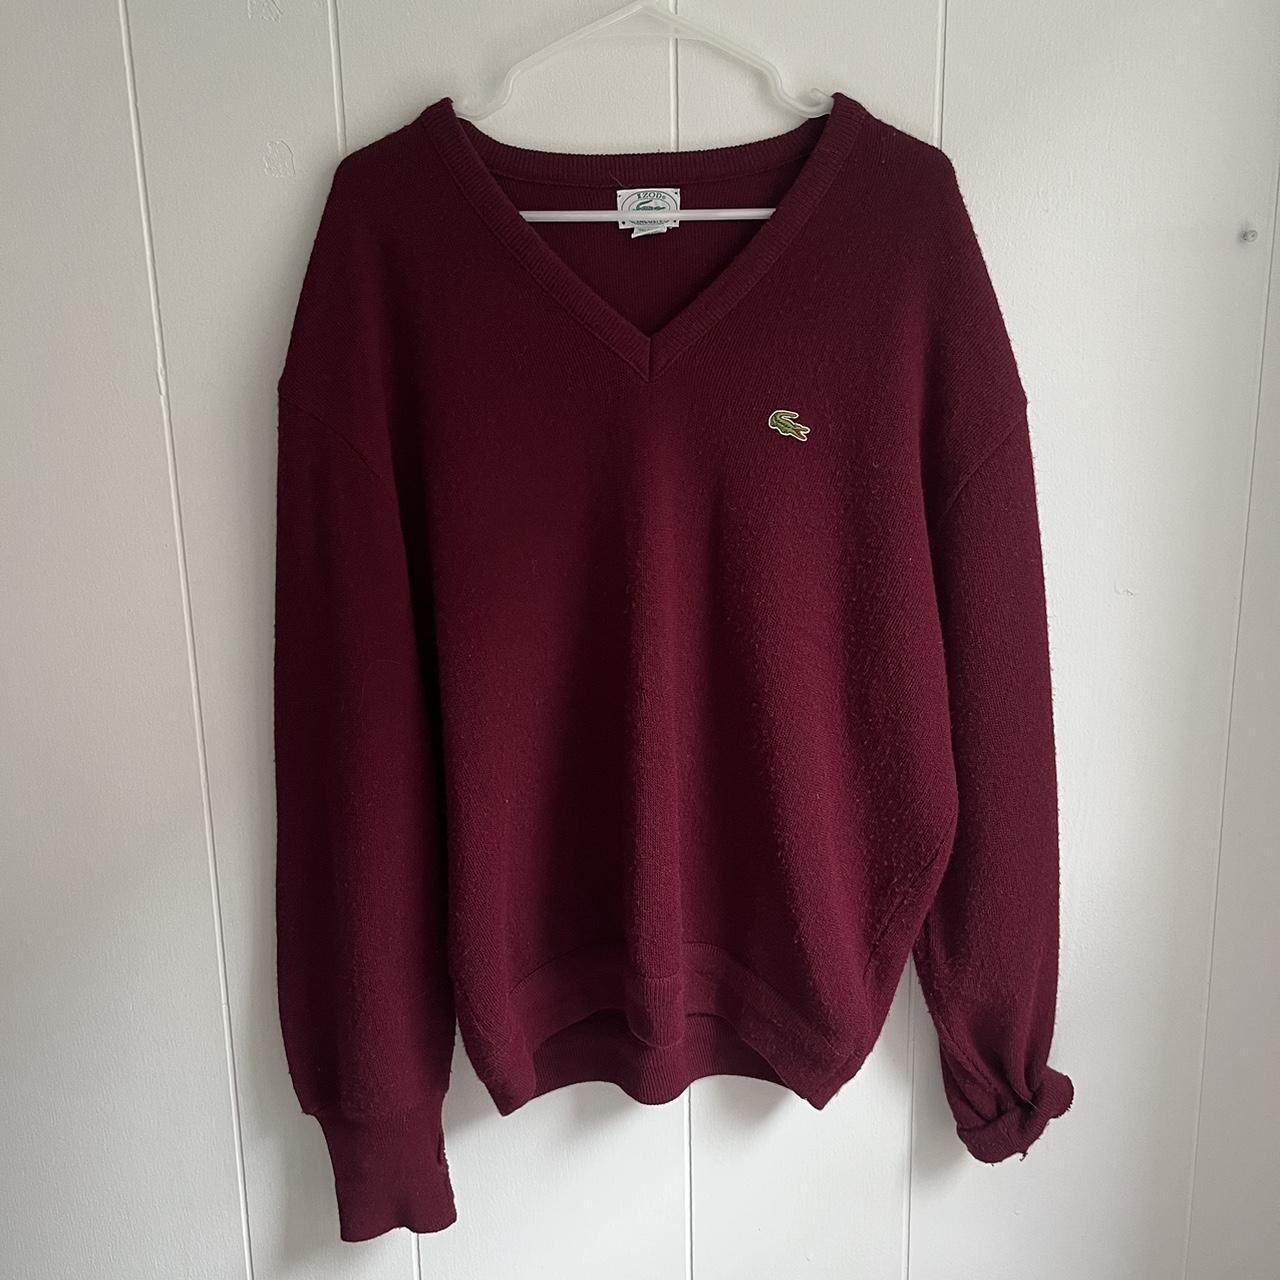 Lacoste maroon v neck sweater pretty sure this is a... - Depop